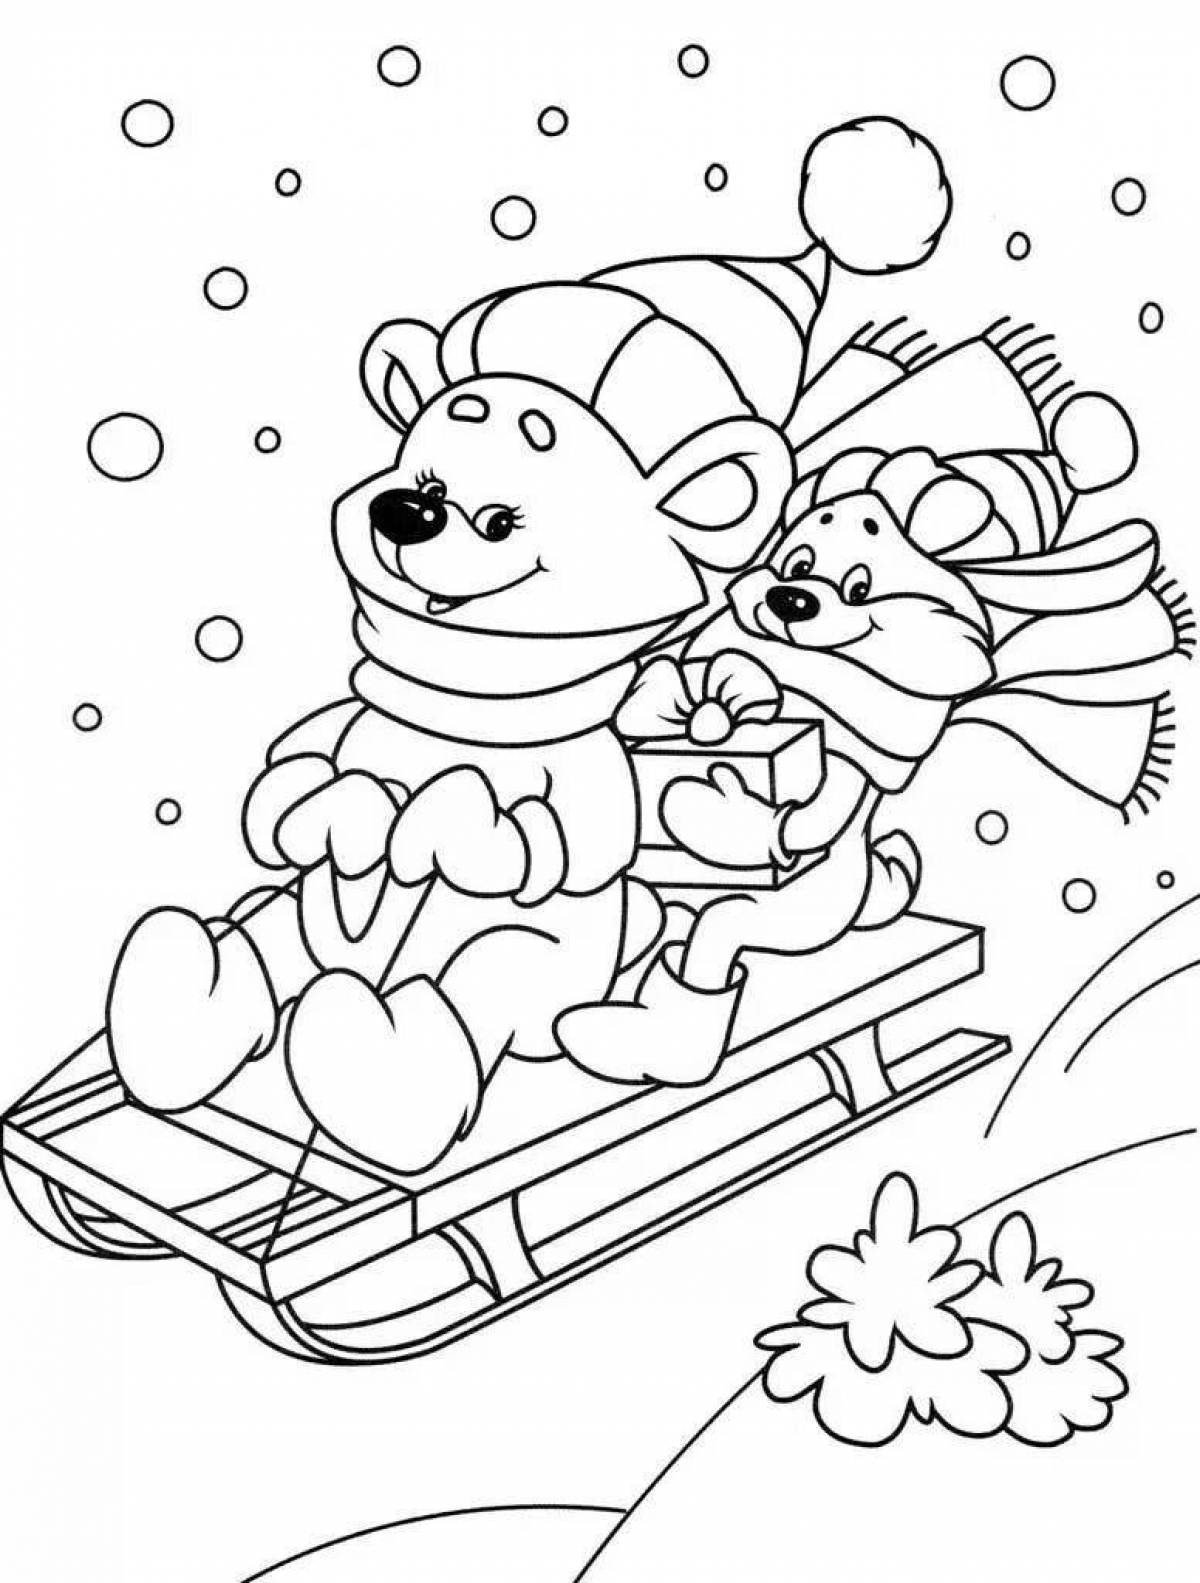 Glitter winter coloring book for 5 year olds